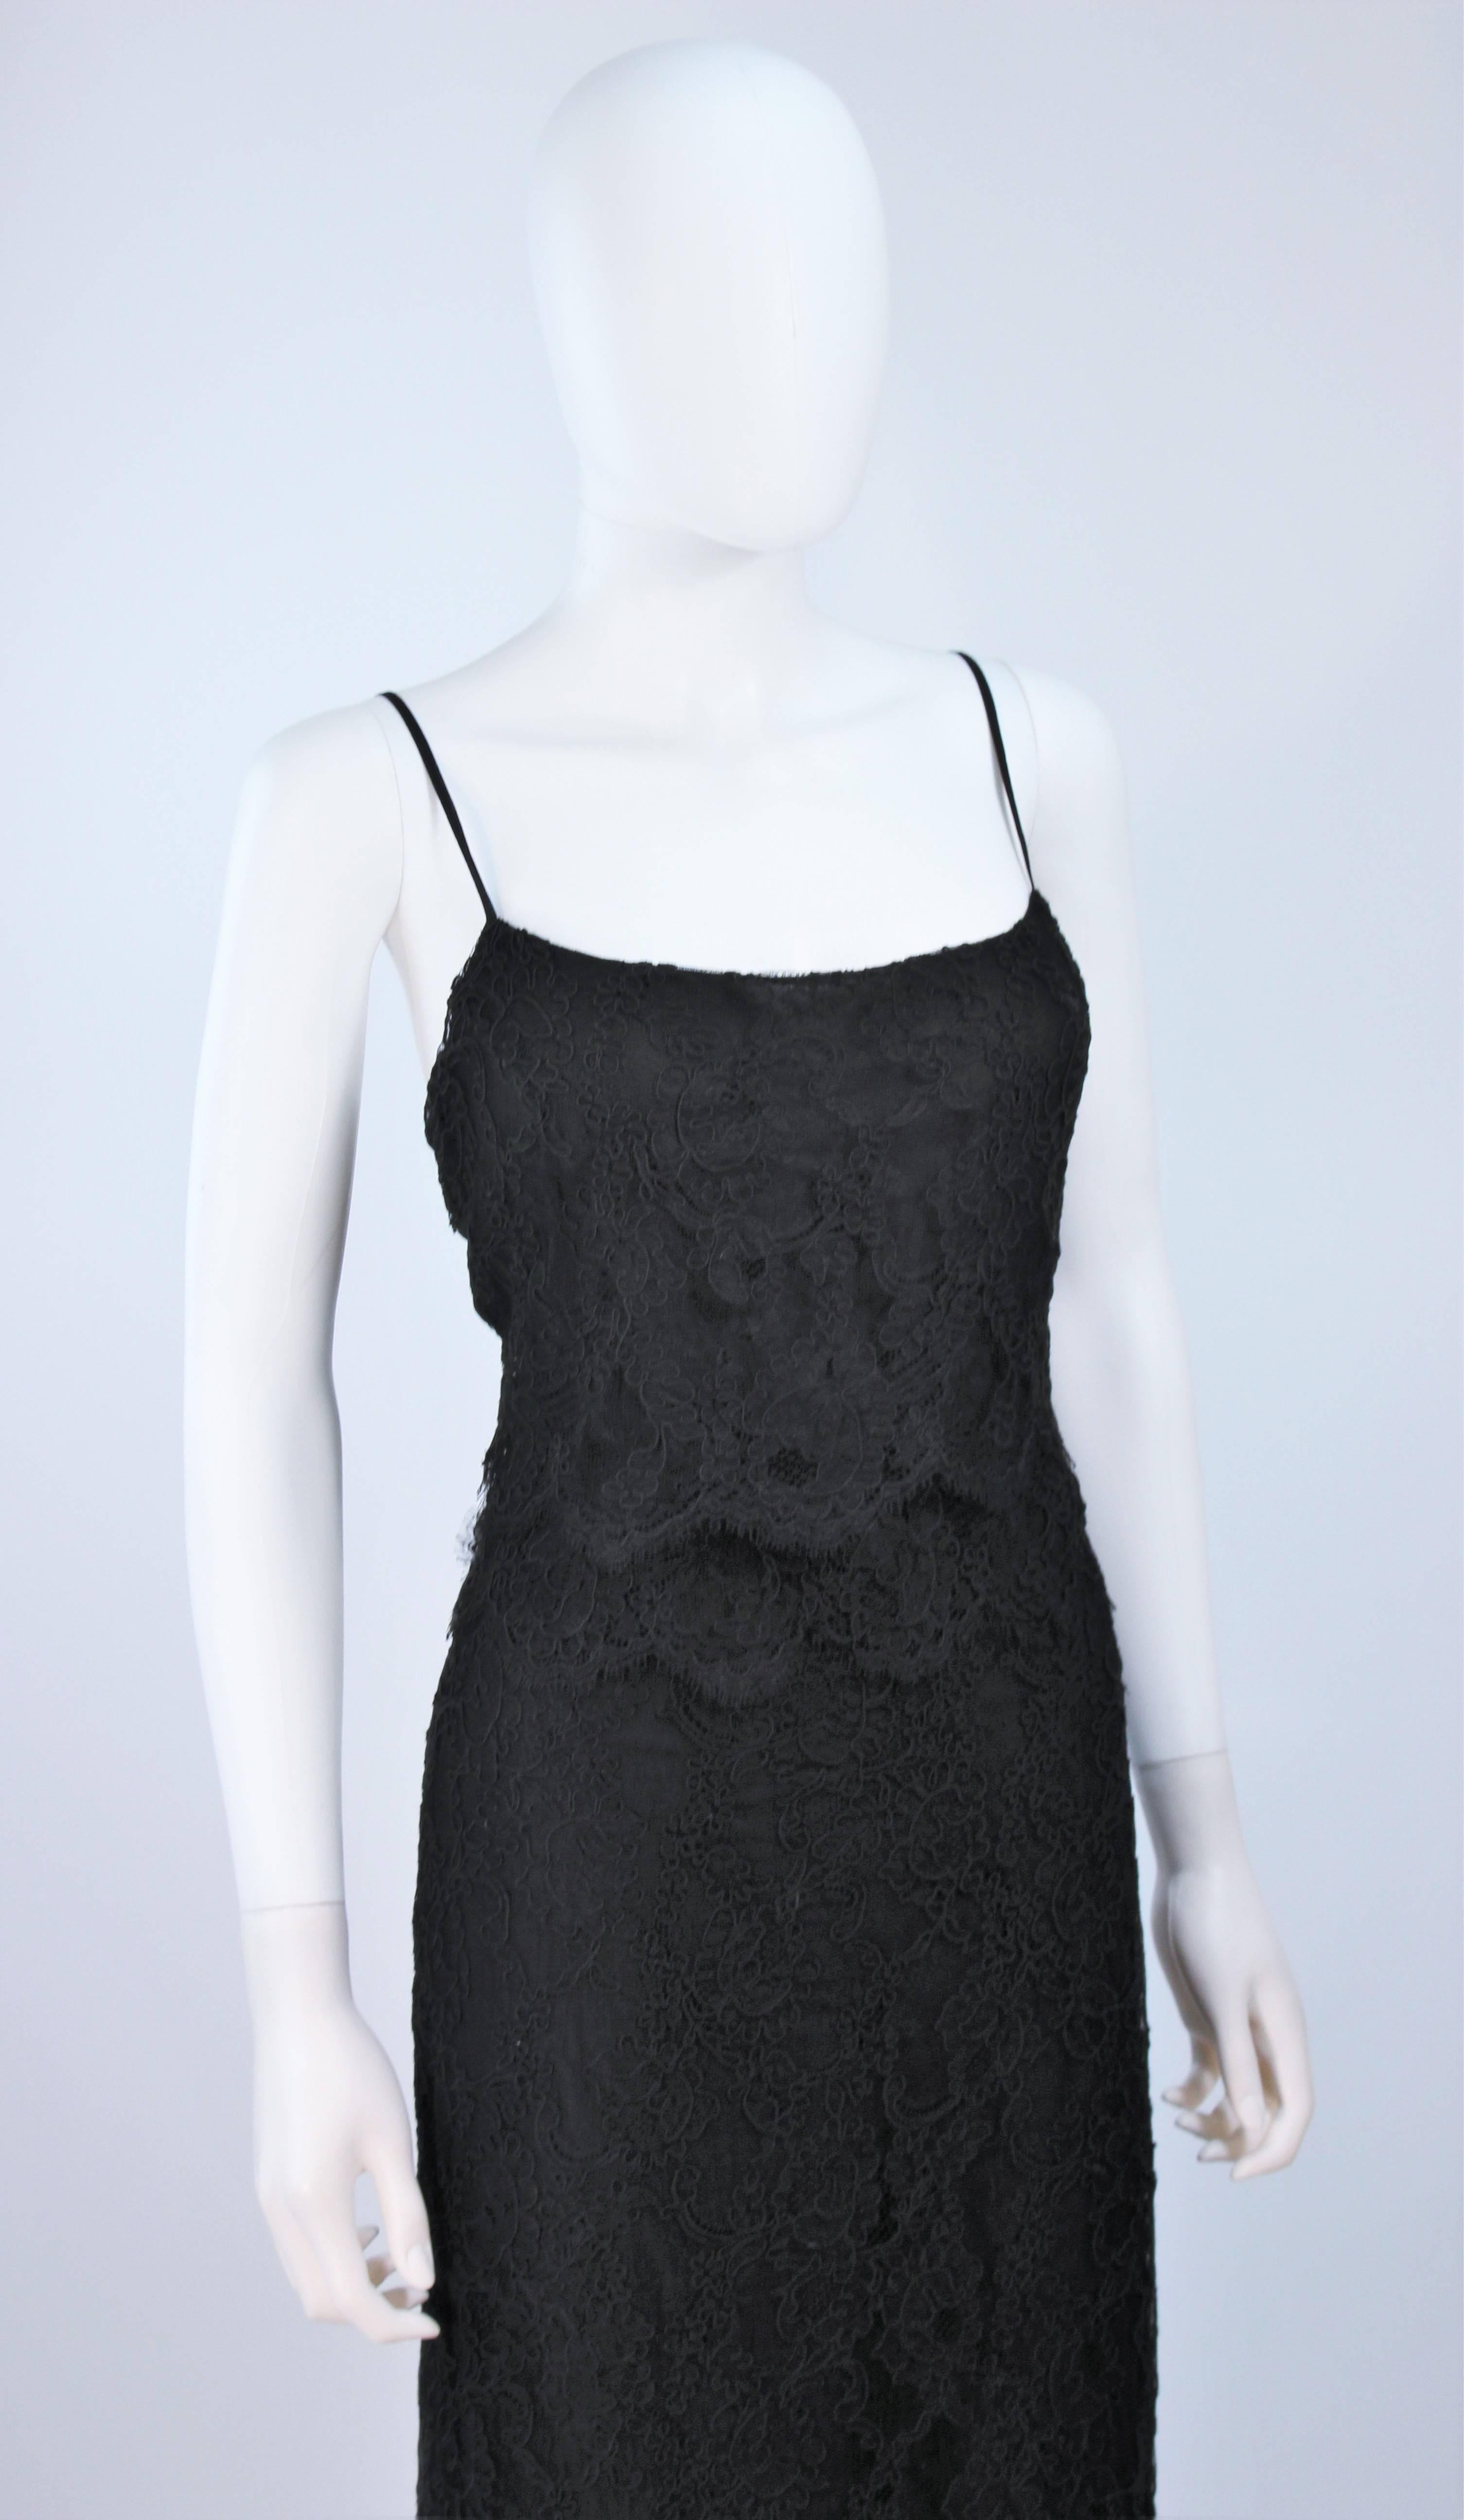 CHANEL Black Tiered Lace Dress Size 10 1